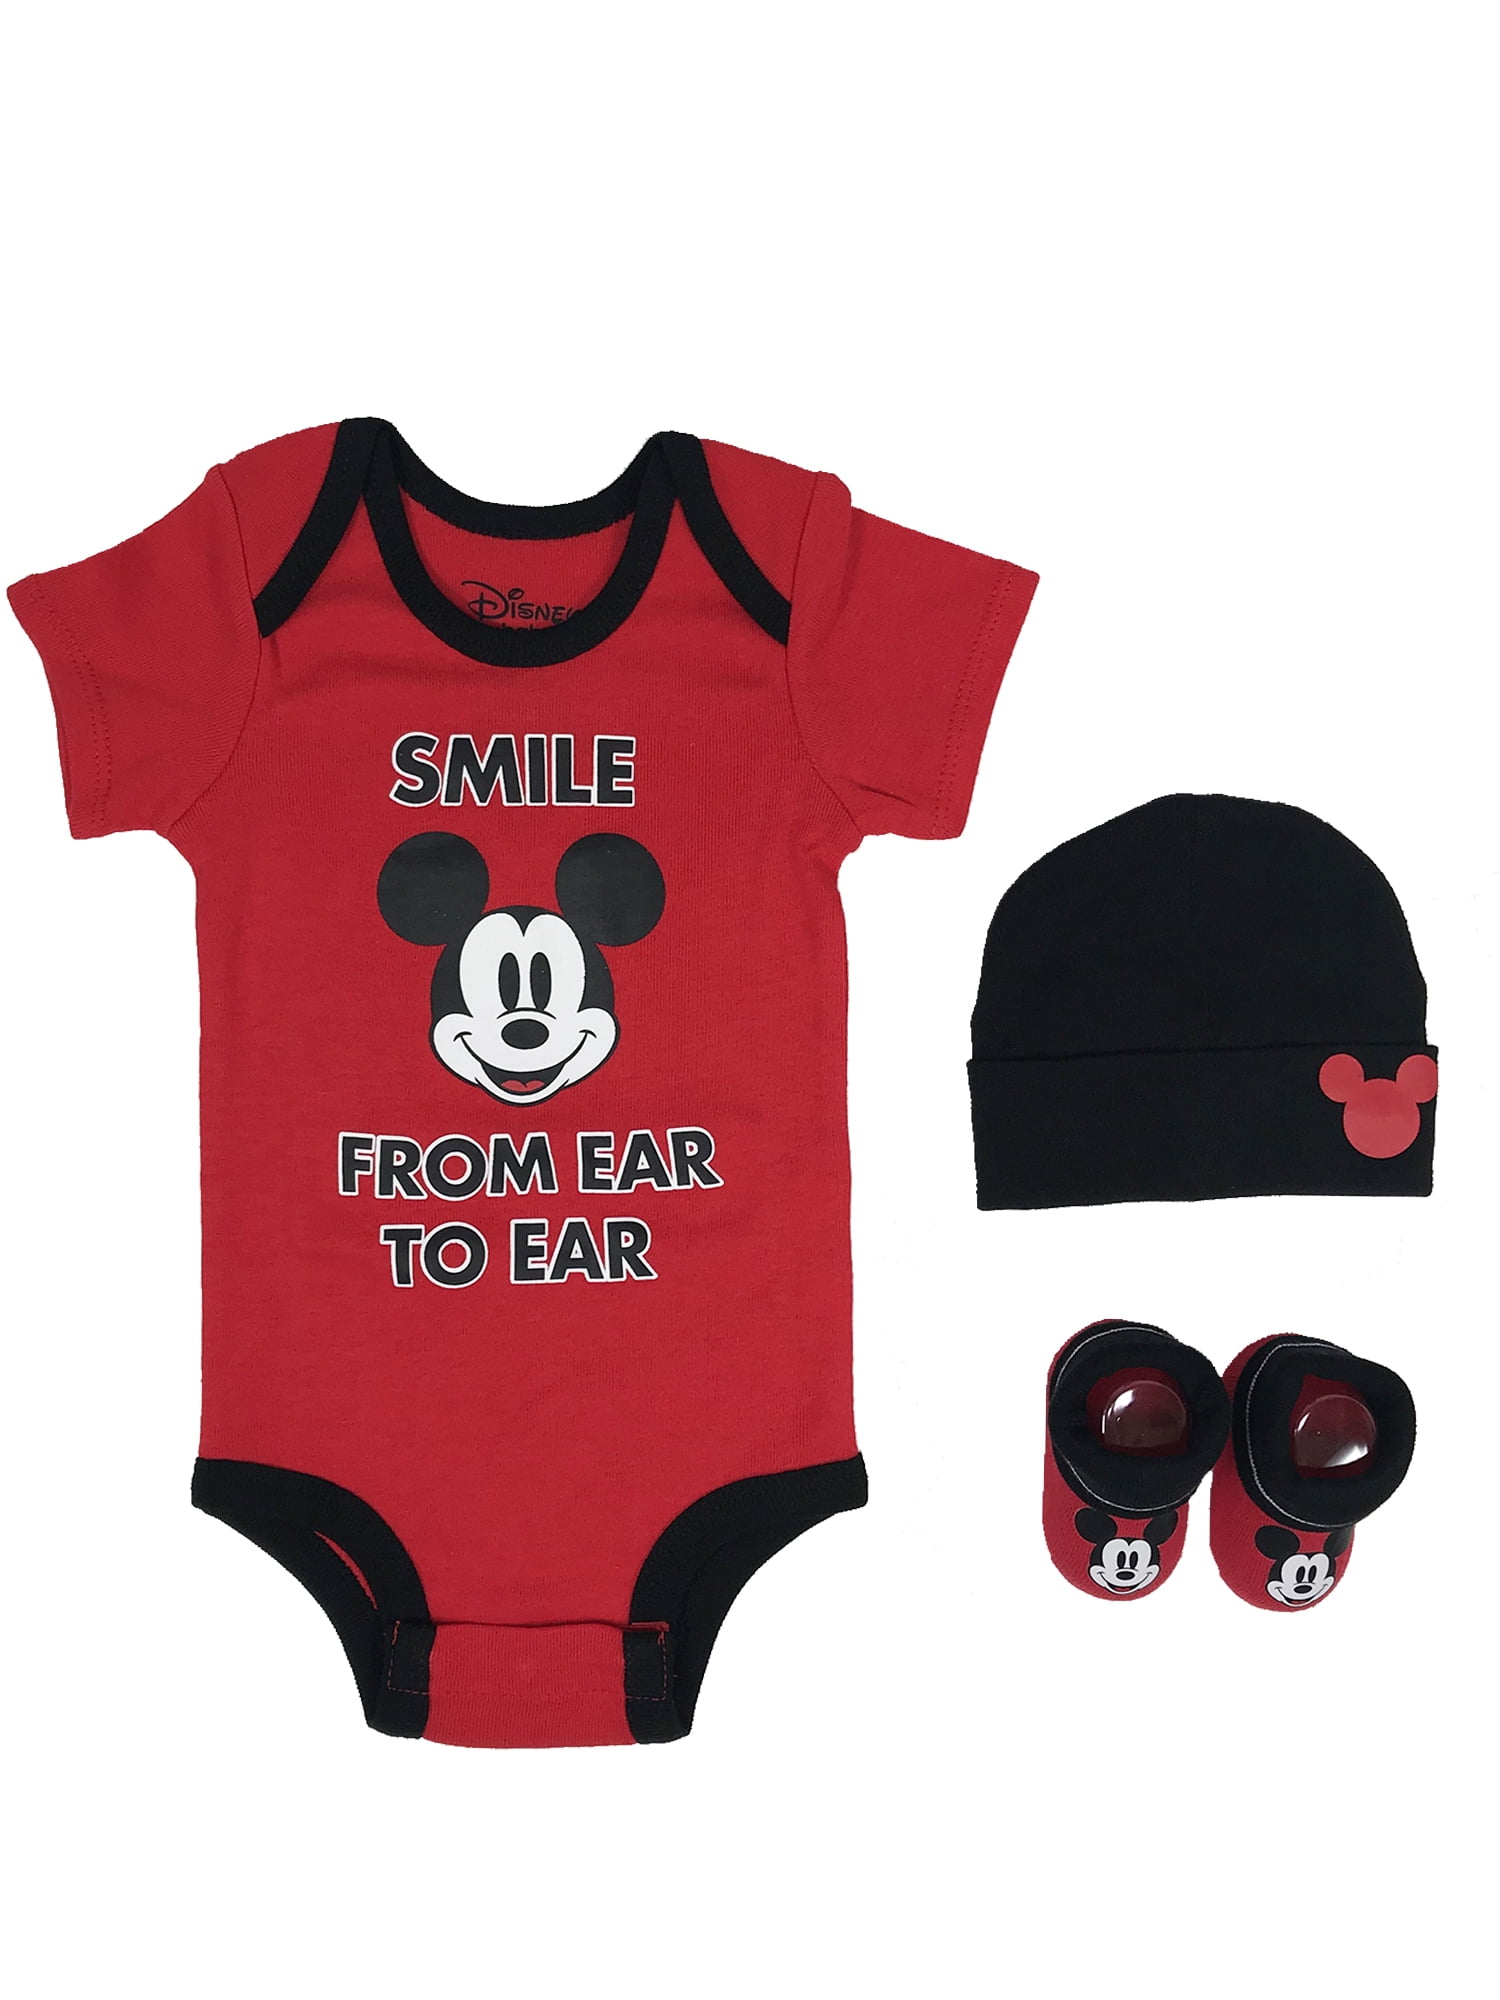 Disney Mickey Mouse Baby Boys Girl Outfit Clothes Gift Set Bodysuit Trousers Hat 